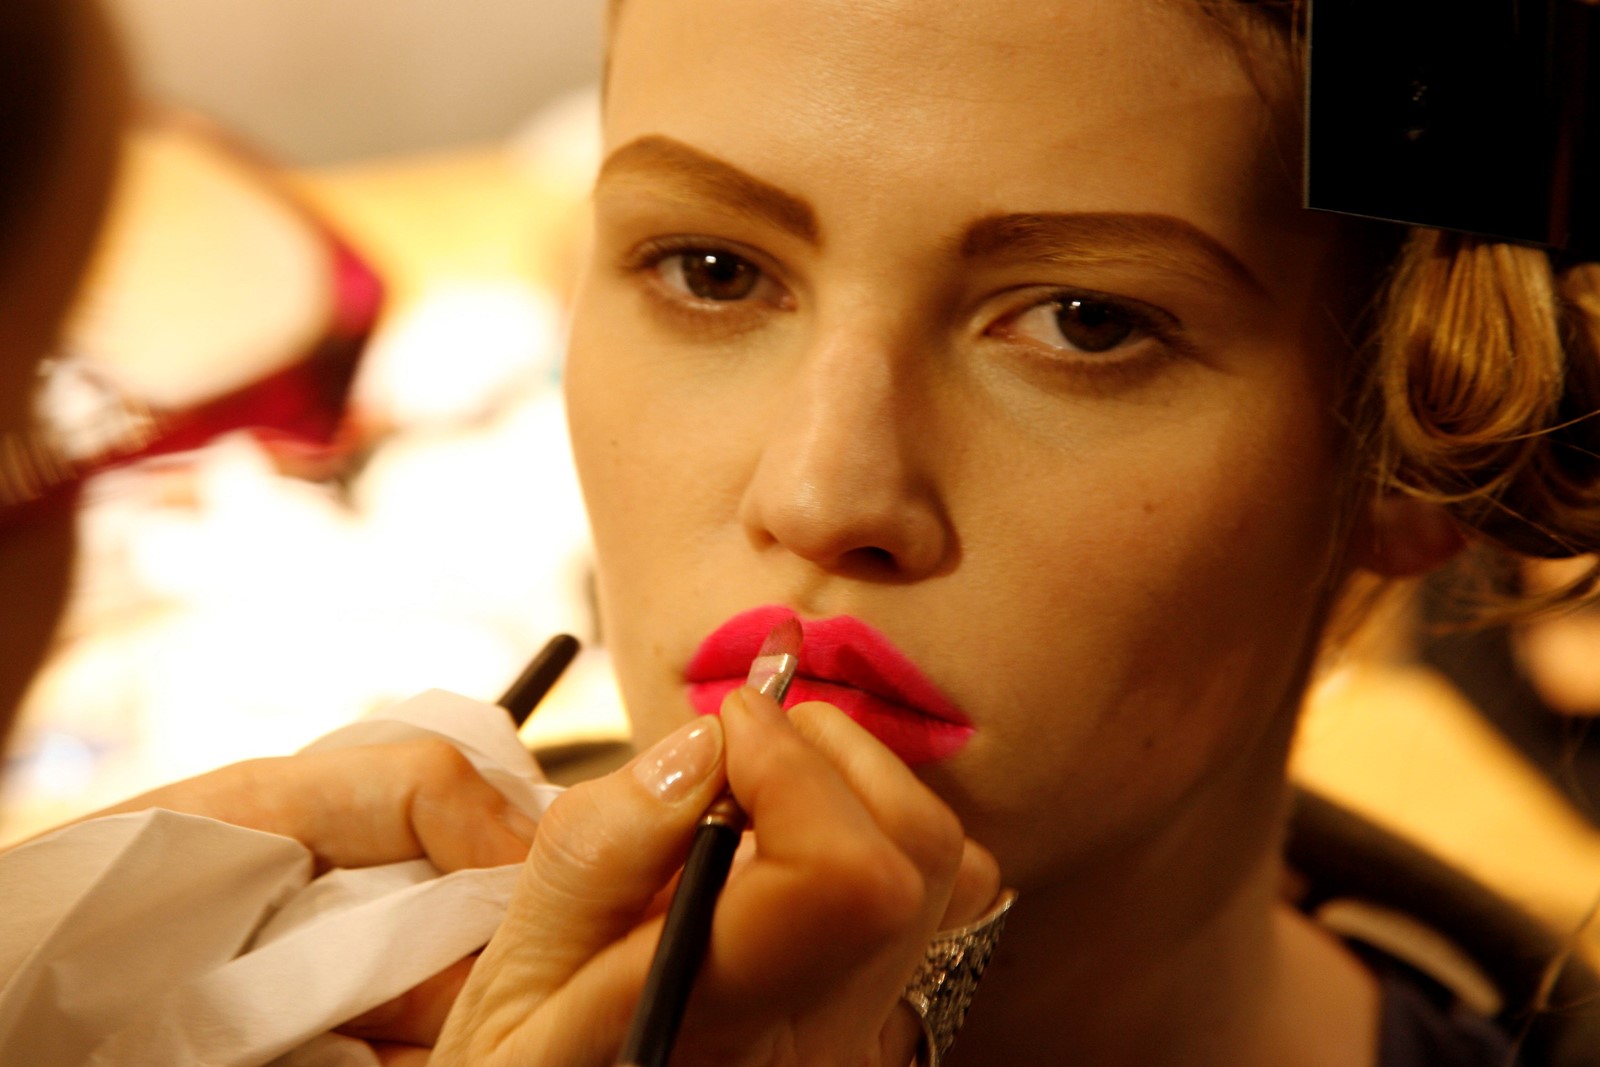 Backstage beauty at Dior over the years